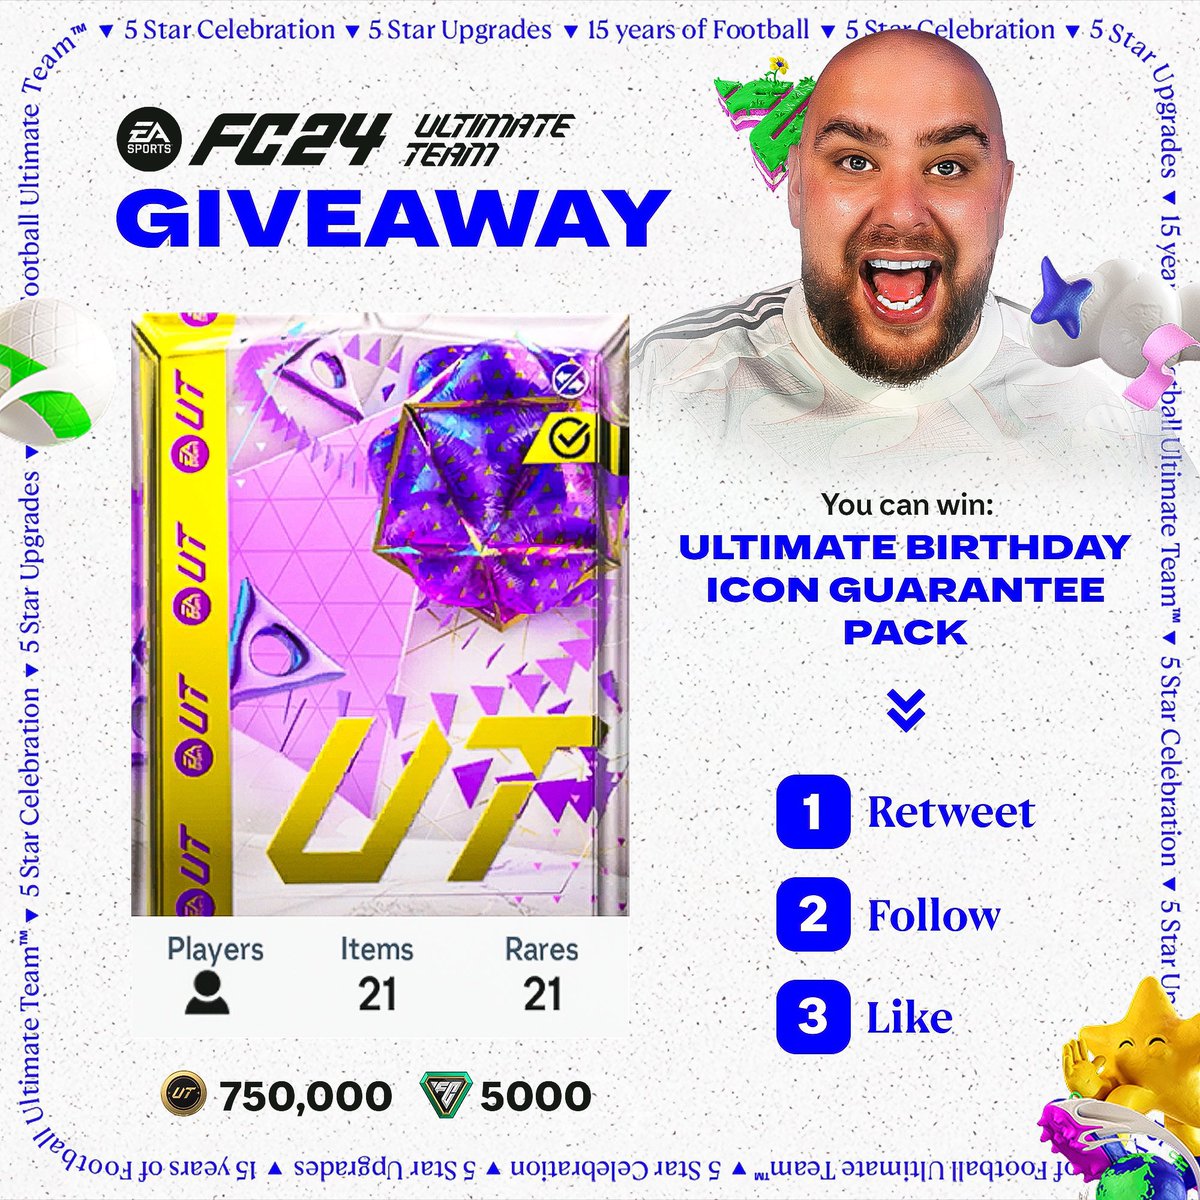 🎂 ULTIMATE BIRTHDAY GIVEAWAY 🎂 For a chance to win the FC points to open the store pack simply do the following ▶️ 1️⃣ RT and LIKE this Tweet 2️⃣ FOLLOW so I can DM you the code 3️⃣ Give this video a watch youtu.be/yWxt8gio77E Good Luck! 😉